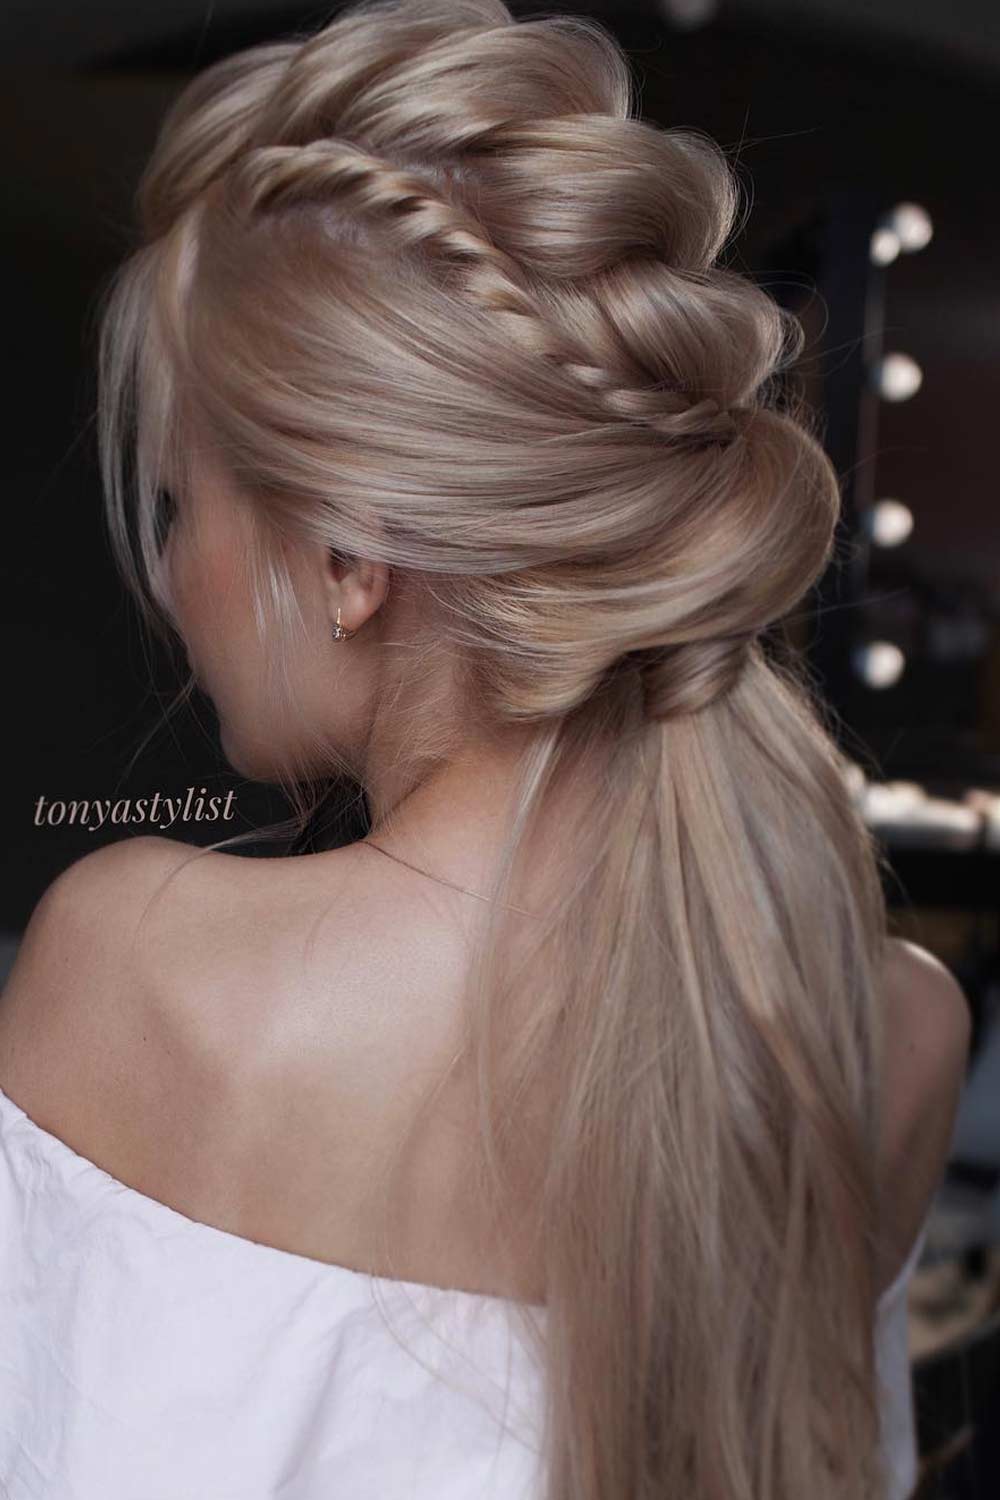 Long Ponytail Hairstyle with Braids